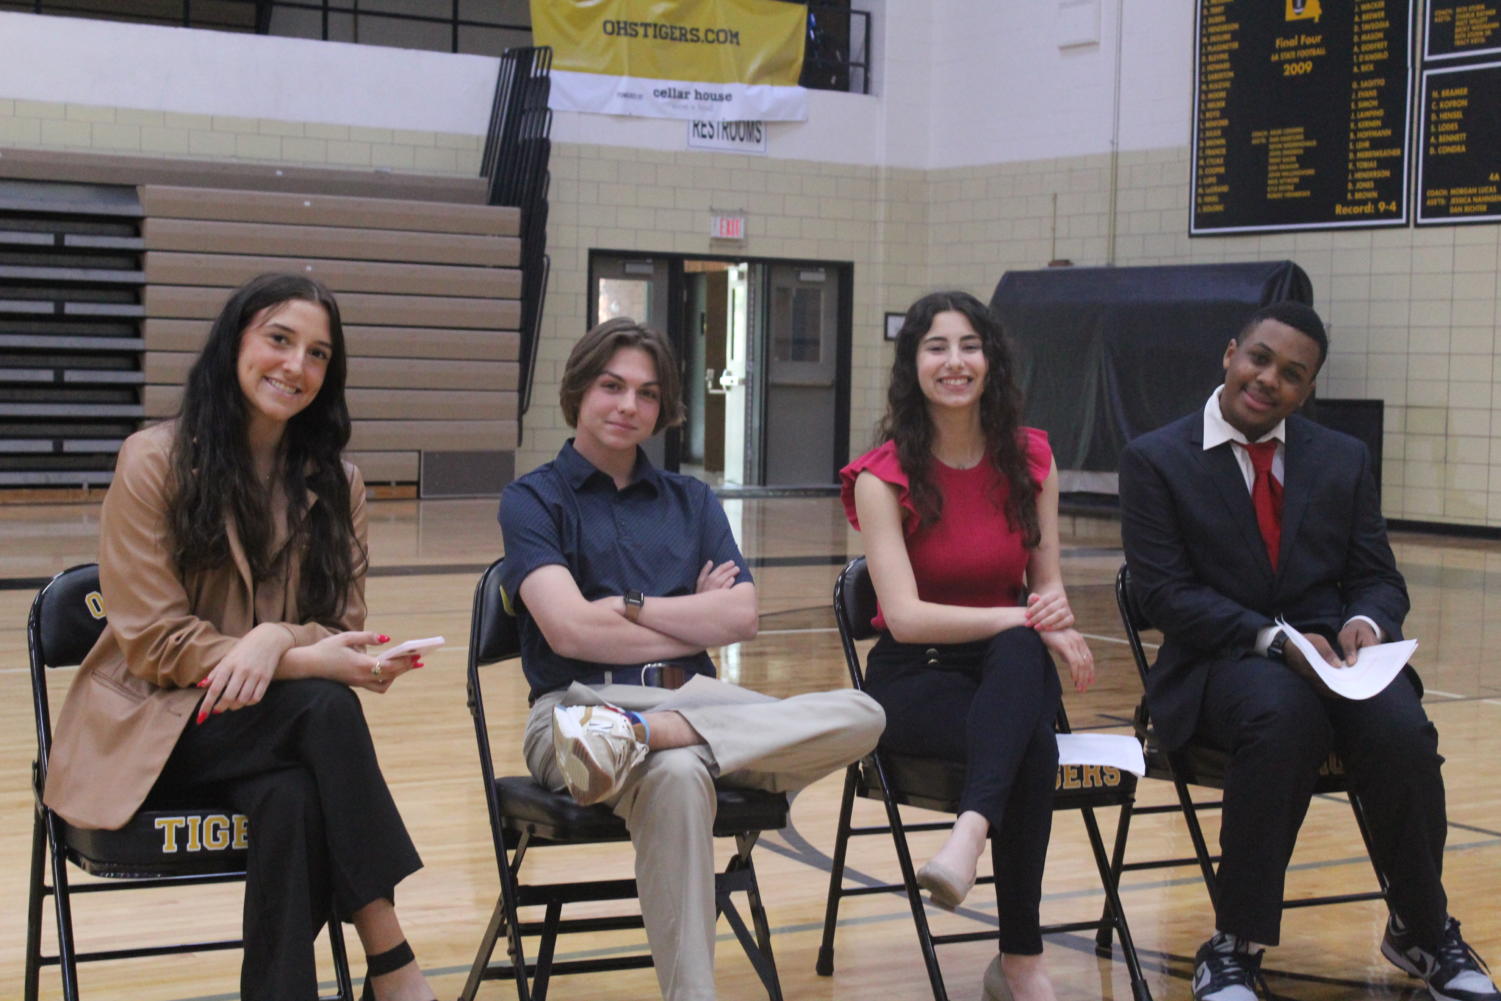 Juniors Olivia Roberds, Mason Bader, Dima Majood and Travis Norris pose for a picture before addressing the junior class with their campaign speeches.
“I’ve worked so hard for the past two years, and I feel so genuinely happy that my peers in my grade level trusted me so much to be able to get their voices and opinions out there,” Majood said. She has served as her class president since her sophomore year.
